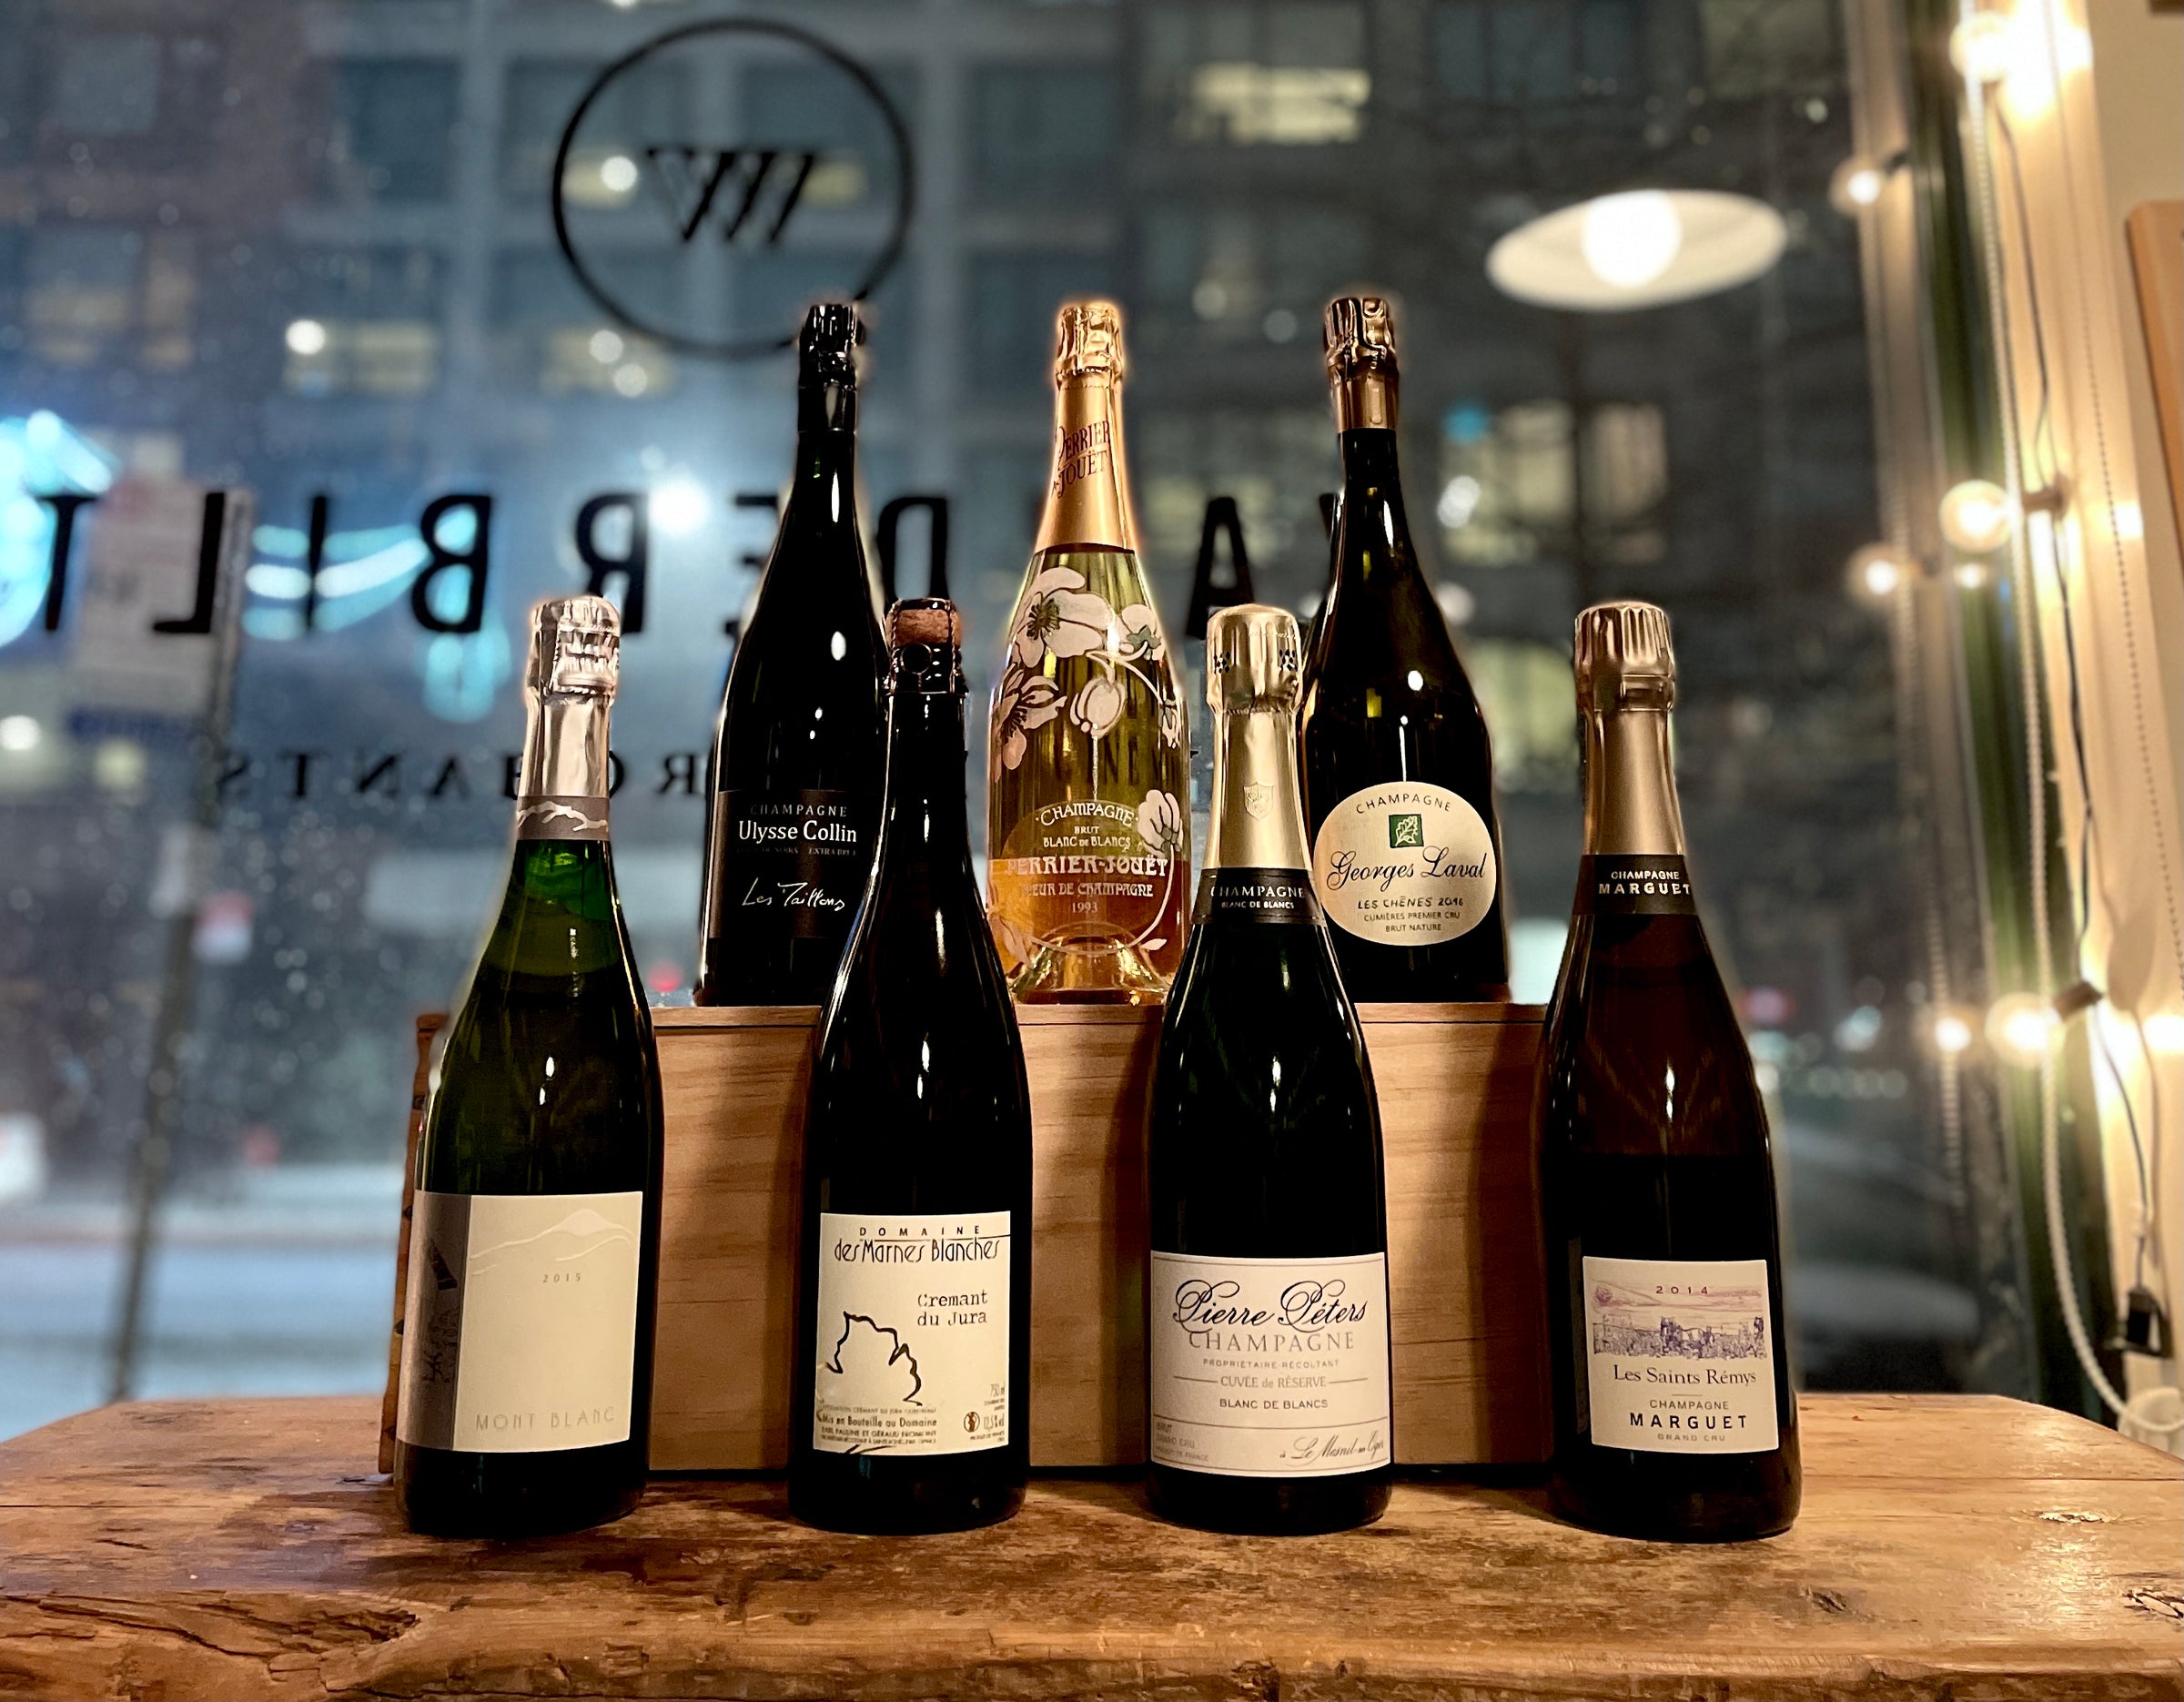 Old and Rare Sparkling Wines